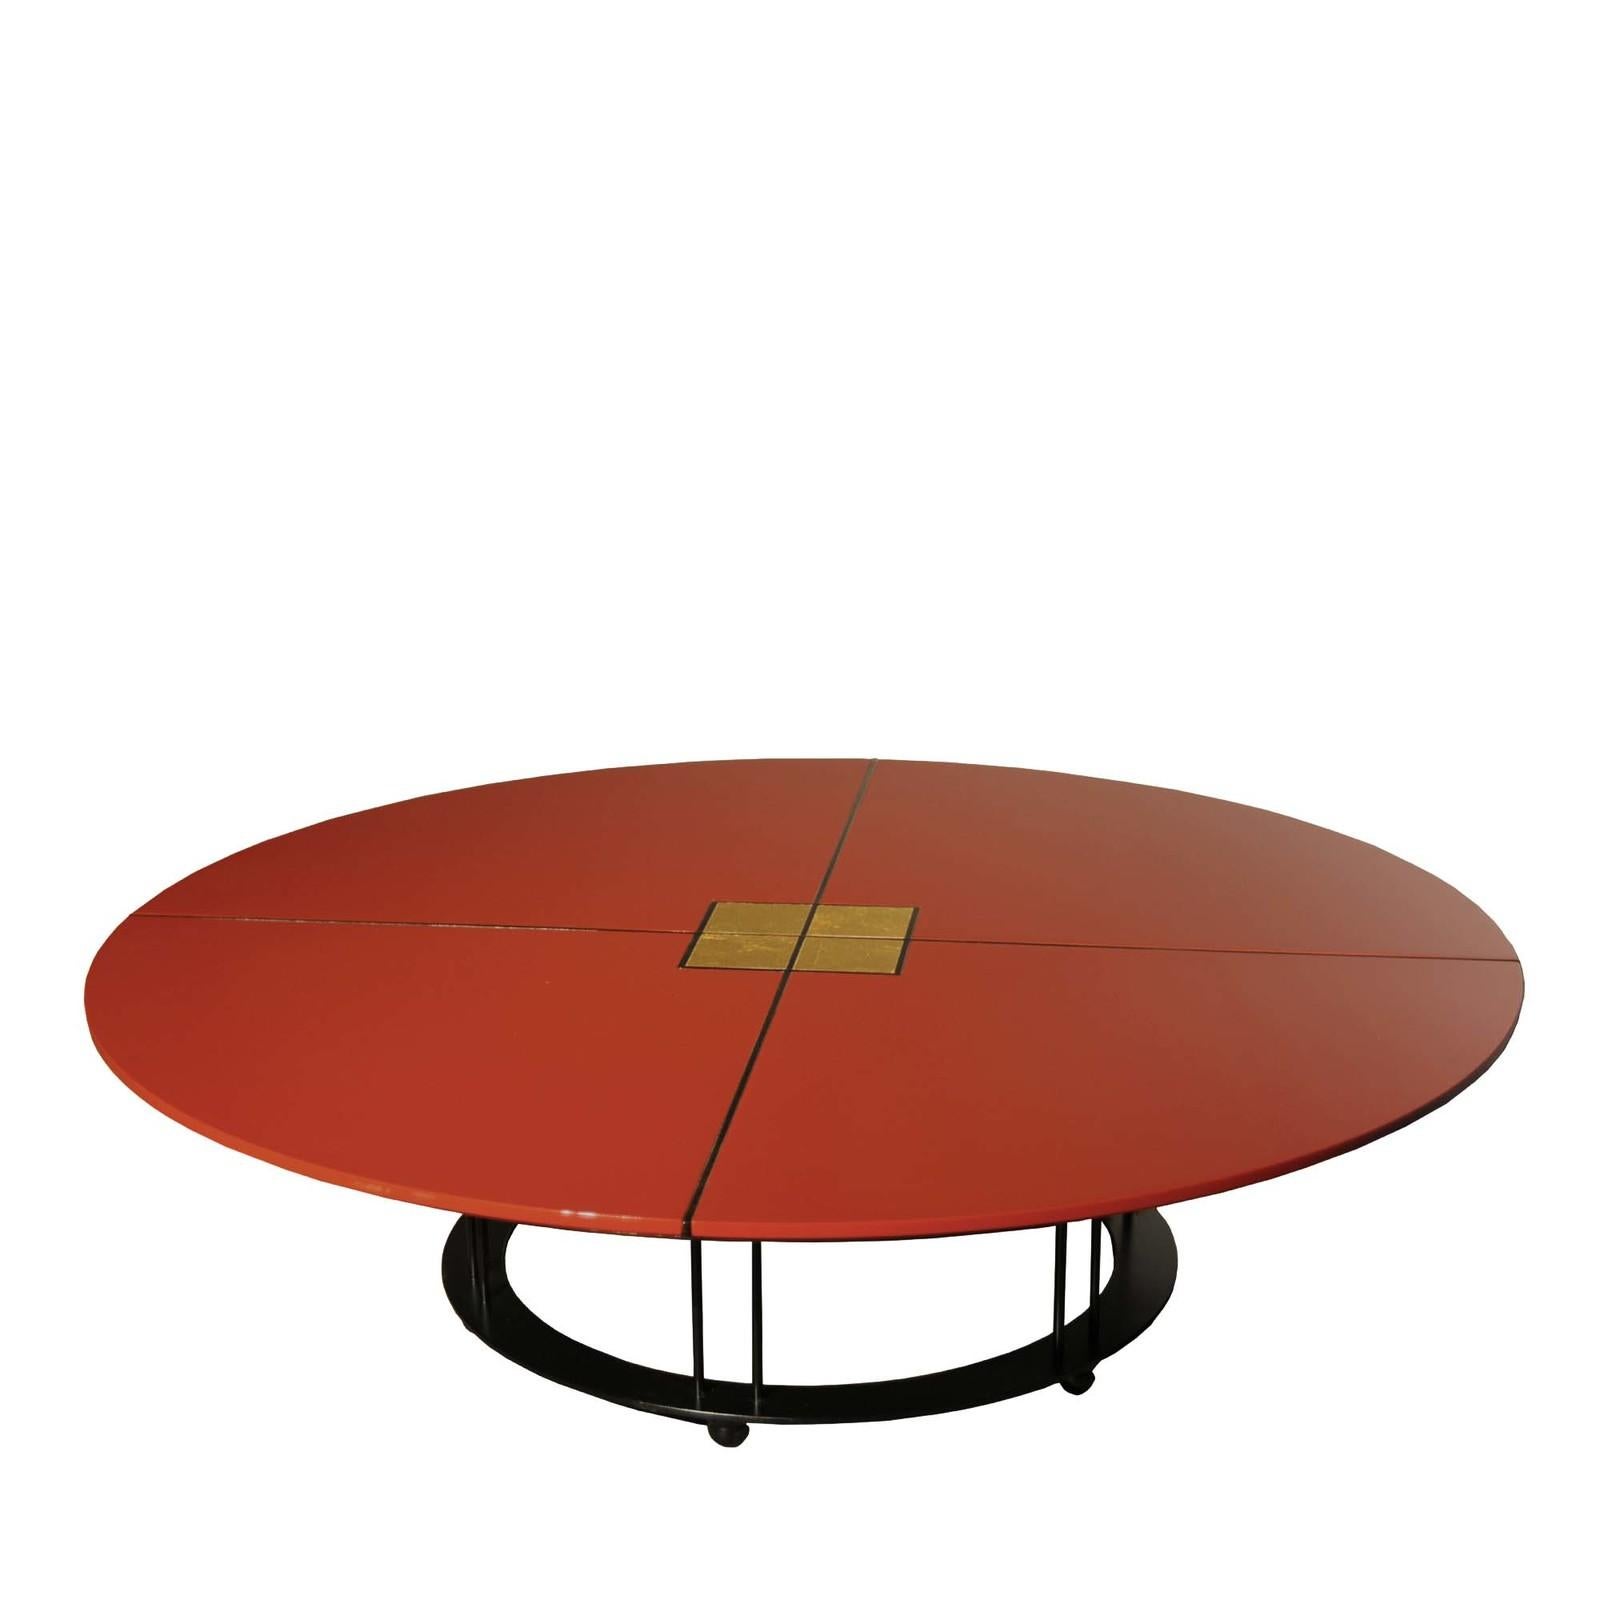 Brimming with midcentury and Minimalist appeal, this low coffee table boasts a geometric profile comprising a wooden top finished with a bright-red shiny polyurethane lacquer, supported by the three short open-column legs fixed to a circular base